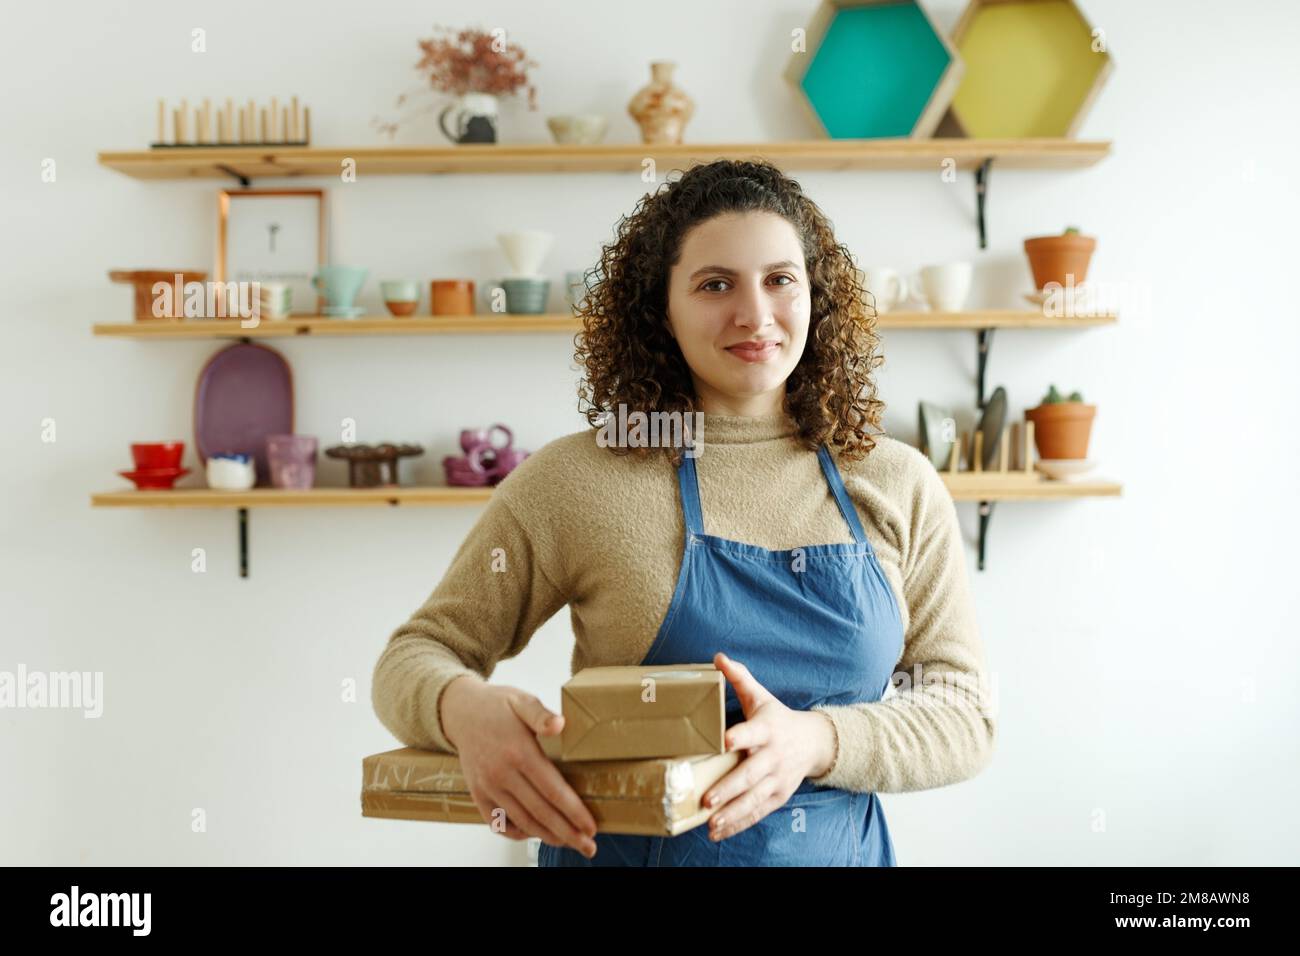 Vertical waist up portrait of young female artisan looking at camera while standing with boxes in workshop, hobby and small business concept. Stock Photo